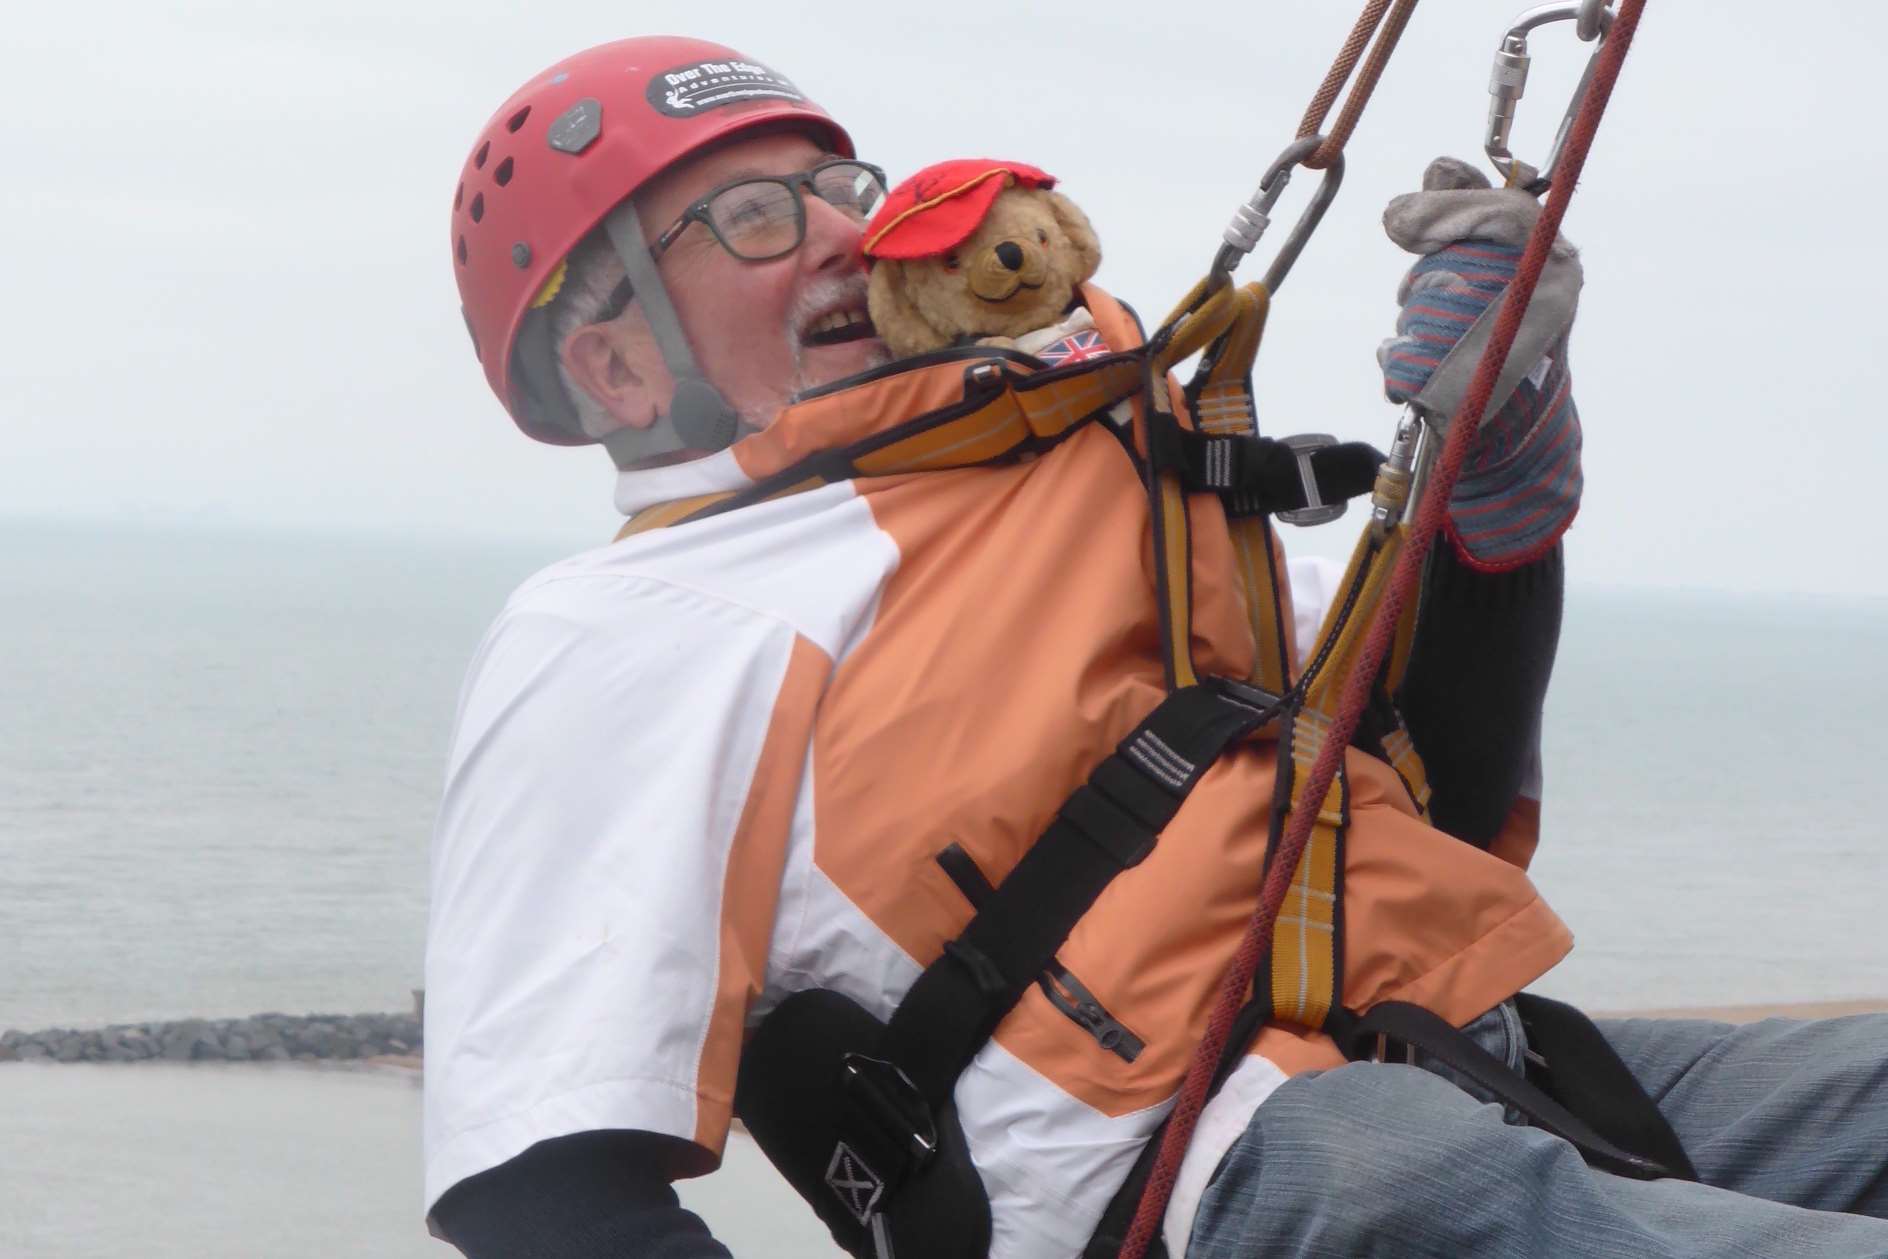 Graham White of Dover with Ted taking the plunge for the Samaritans at Leas Cliff Hall, Folkestone. The KM Charity Team's event attracted 80 participants raising £7,500 for 14 good causes.